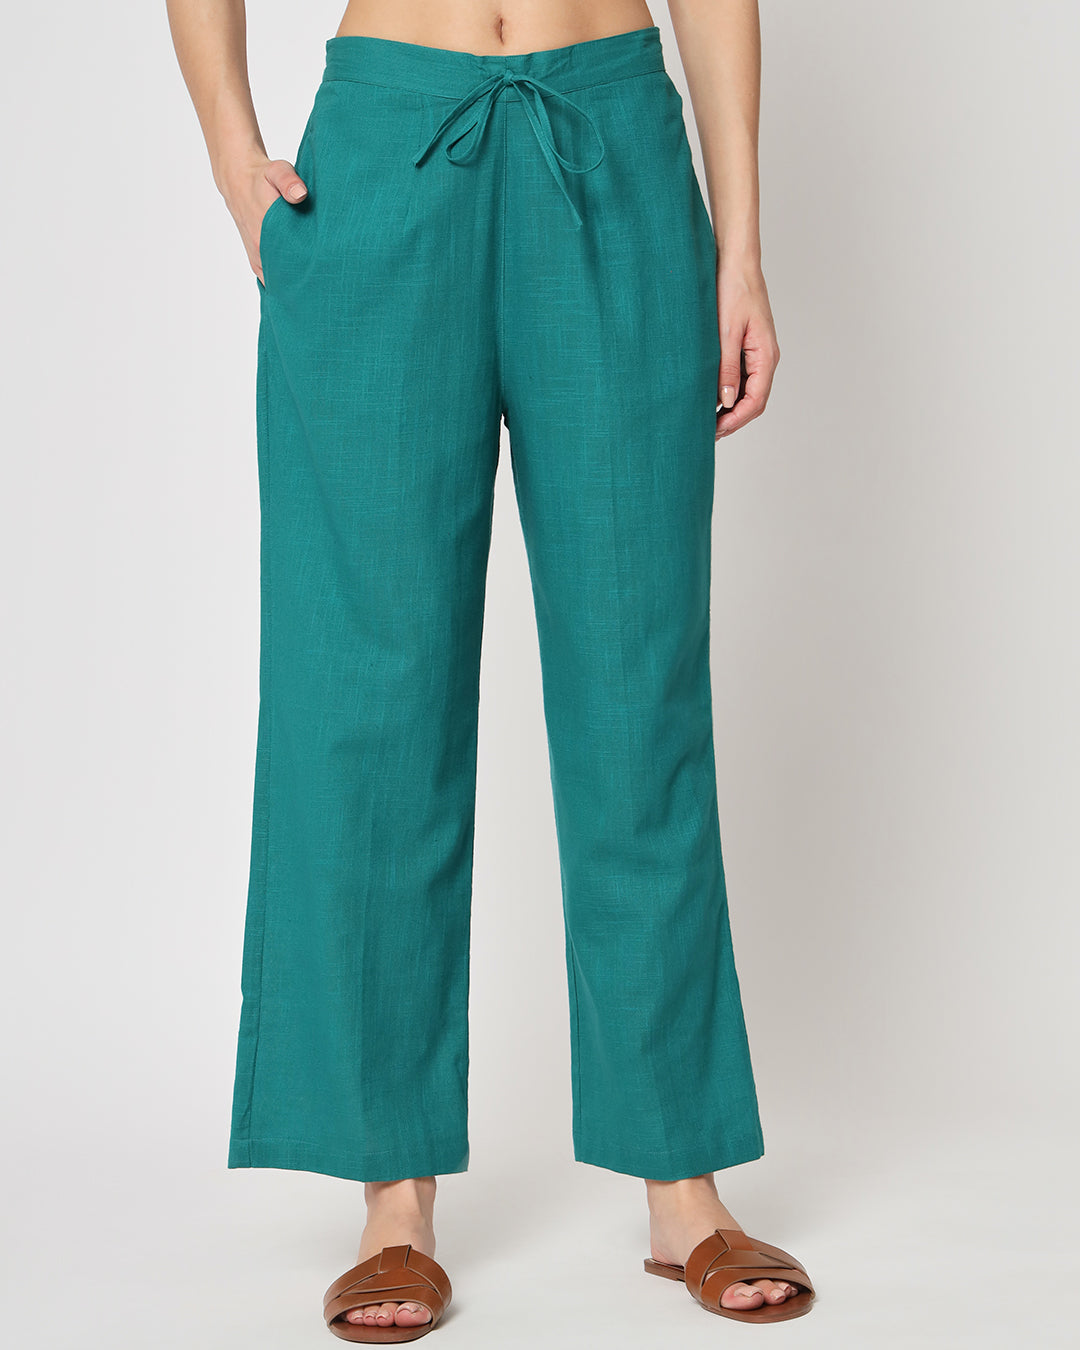 Combo: Black & Forest Green Straight Pants- Set of 2